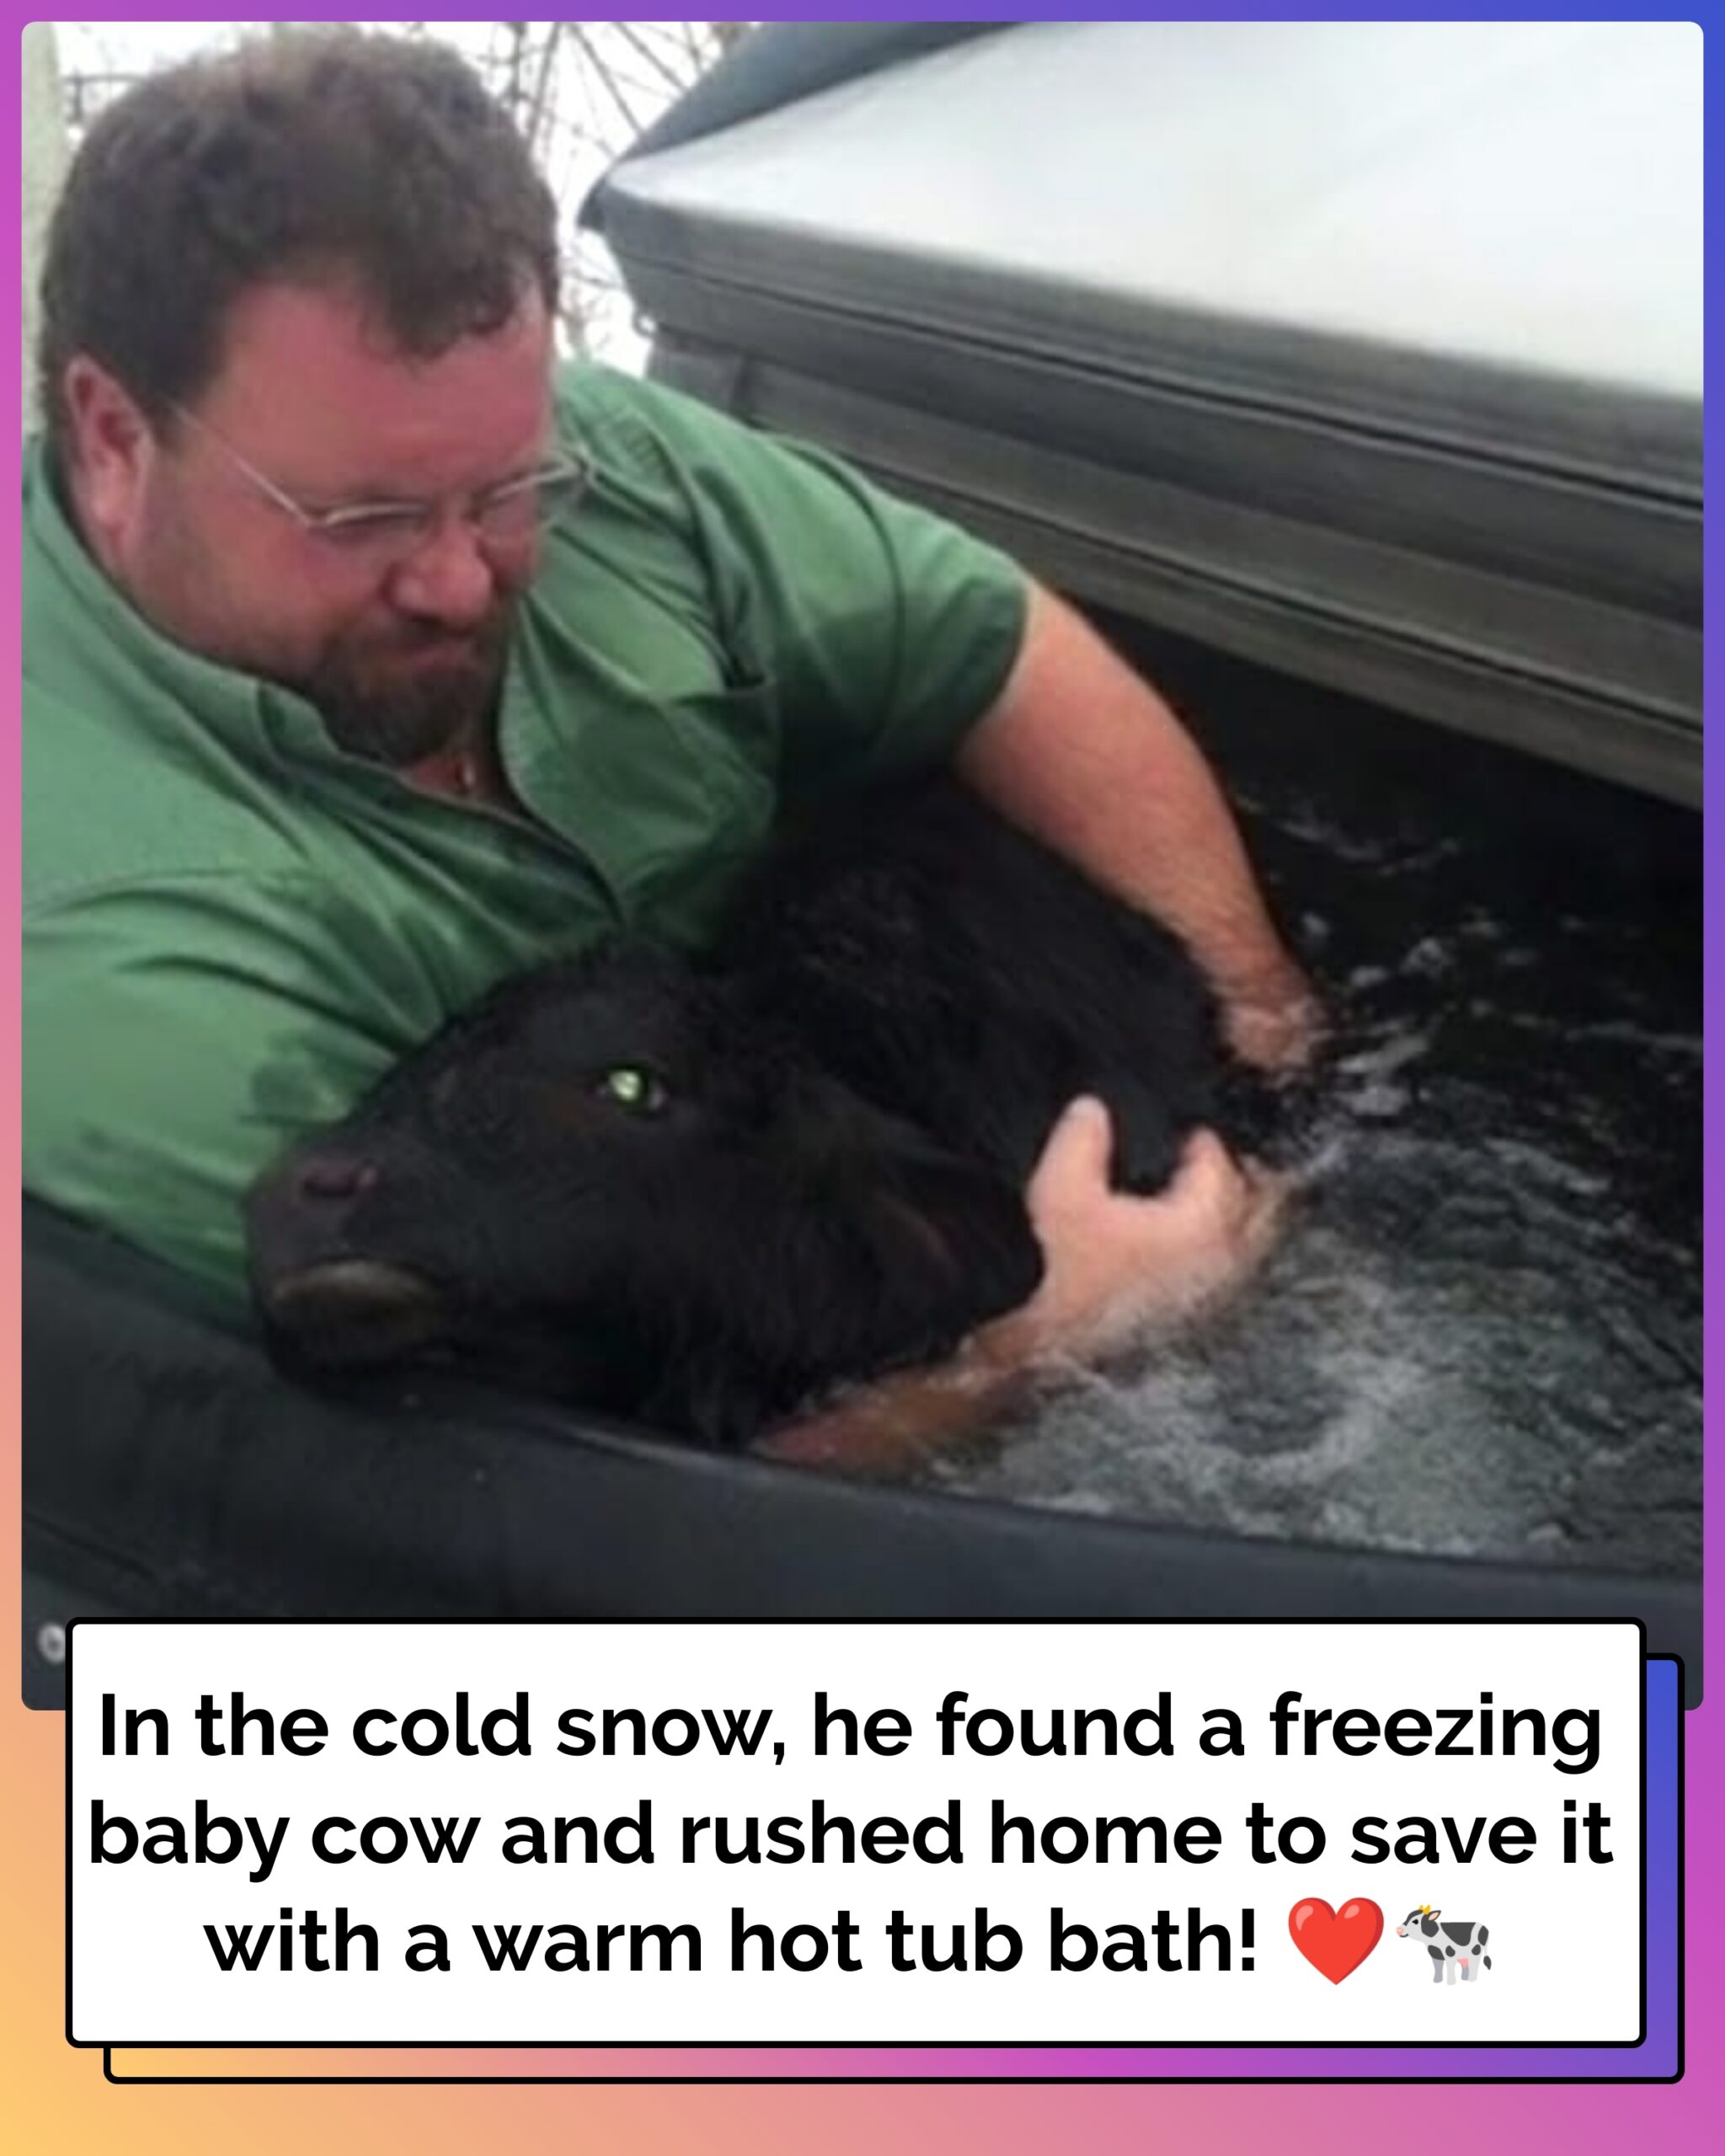 Man finds baby cow freezing in the snow: Rushes home to fire up a hot tub and save his life